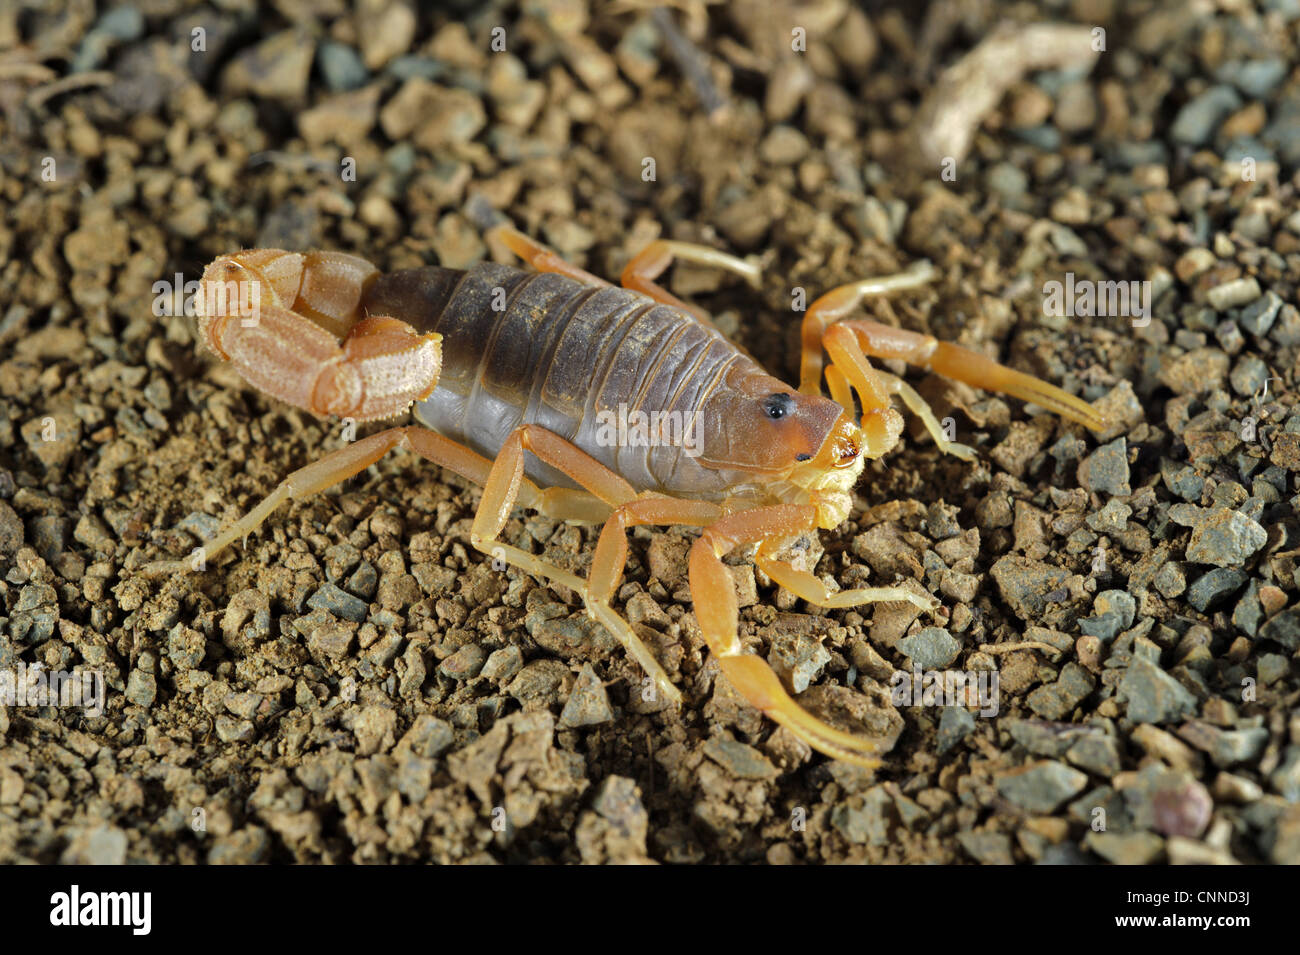 Yellow Thick-tailed Scorpion (Parabuthus mossambicensis) adult, on stony ground, Karoo Region, South Africa Stock Photo